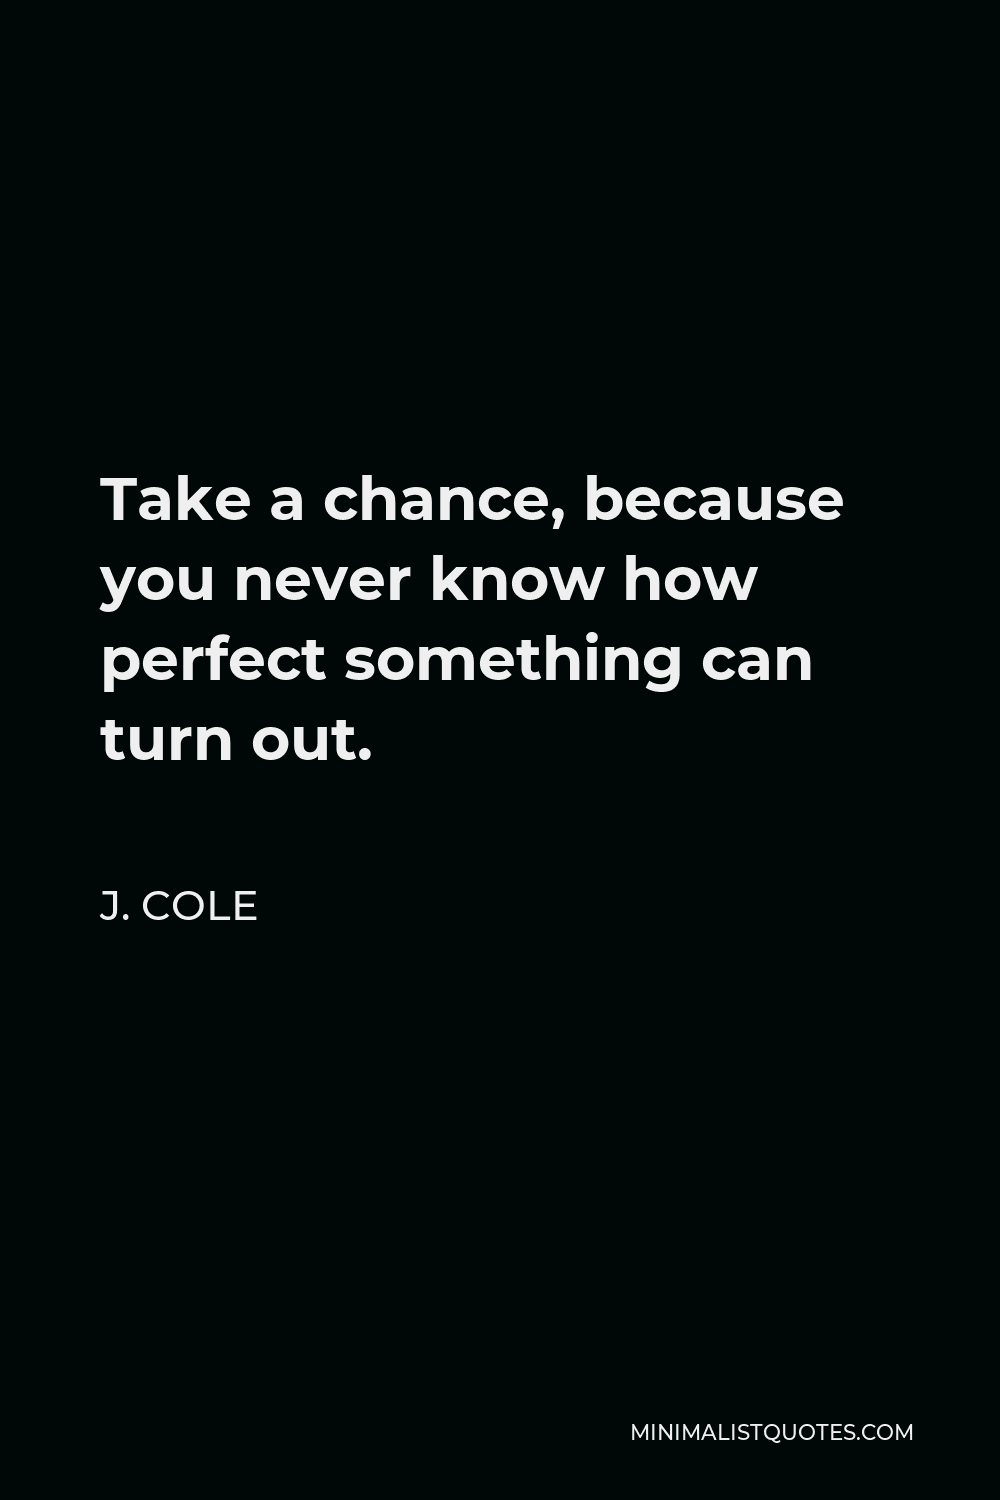 J. Cole Quote - Take a chance, because you never know how perfect something can turn out.